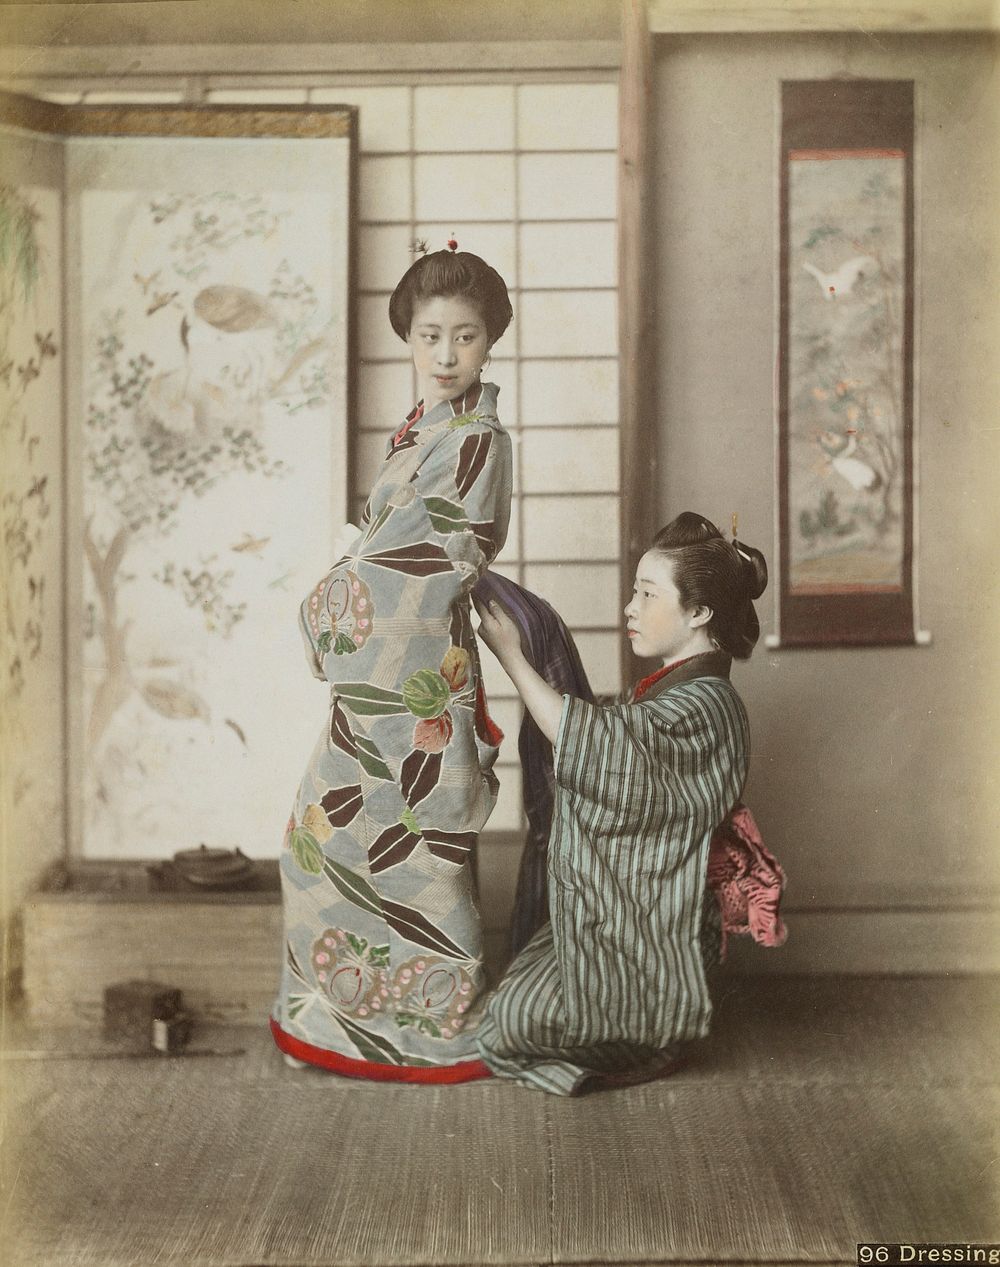 Two young women wearing traditional Japanese garments; kneeling woman at right wearing blue and grey striped kimono assists…